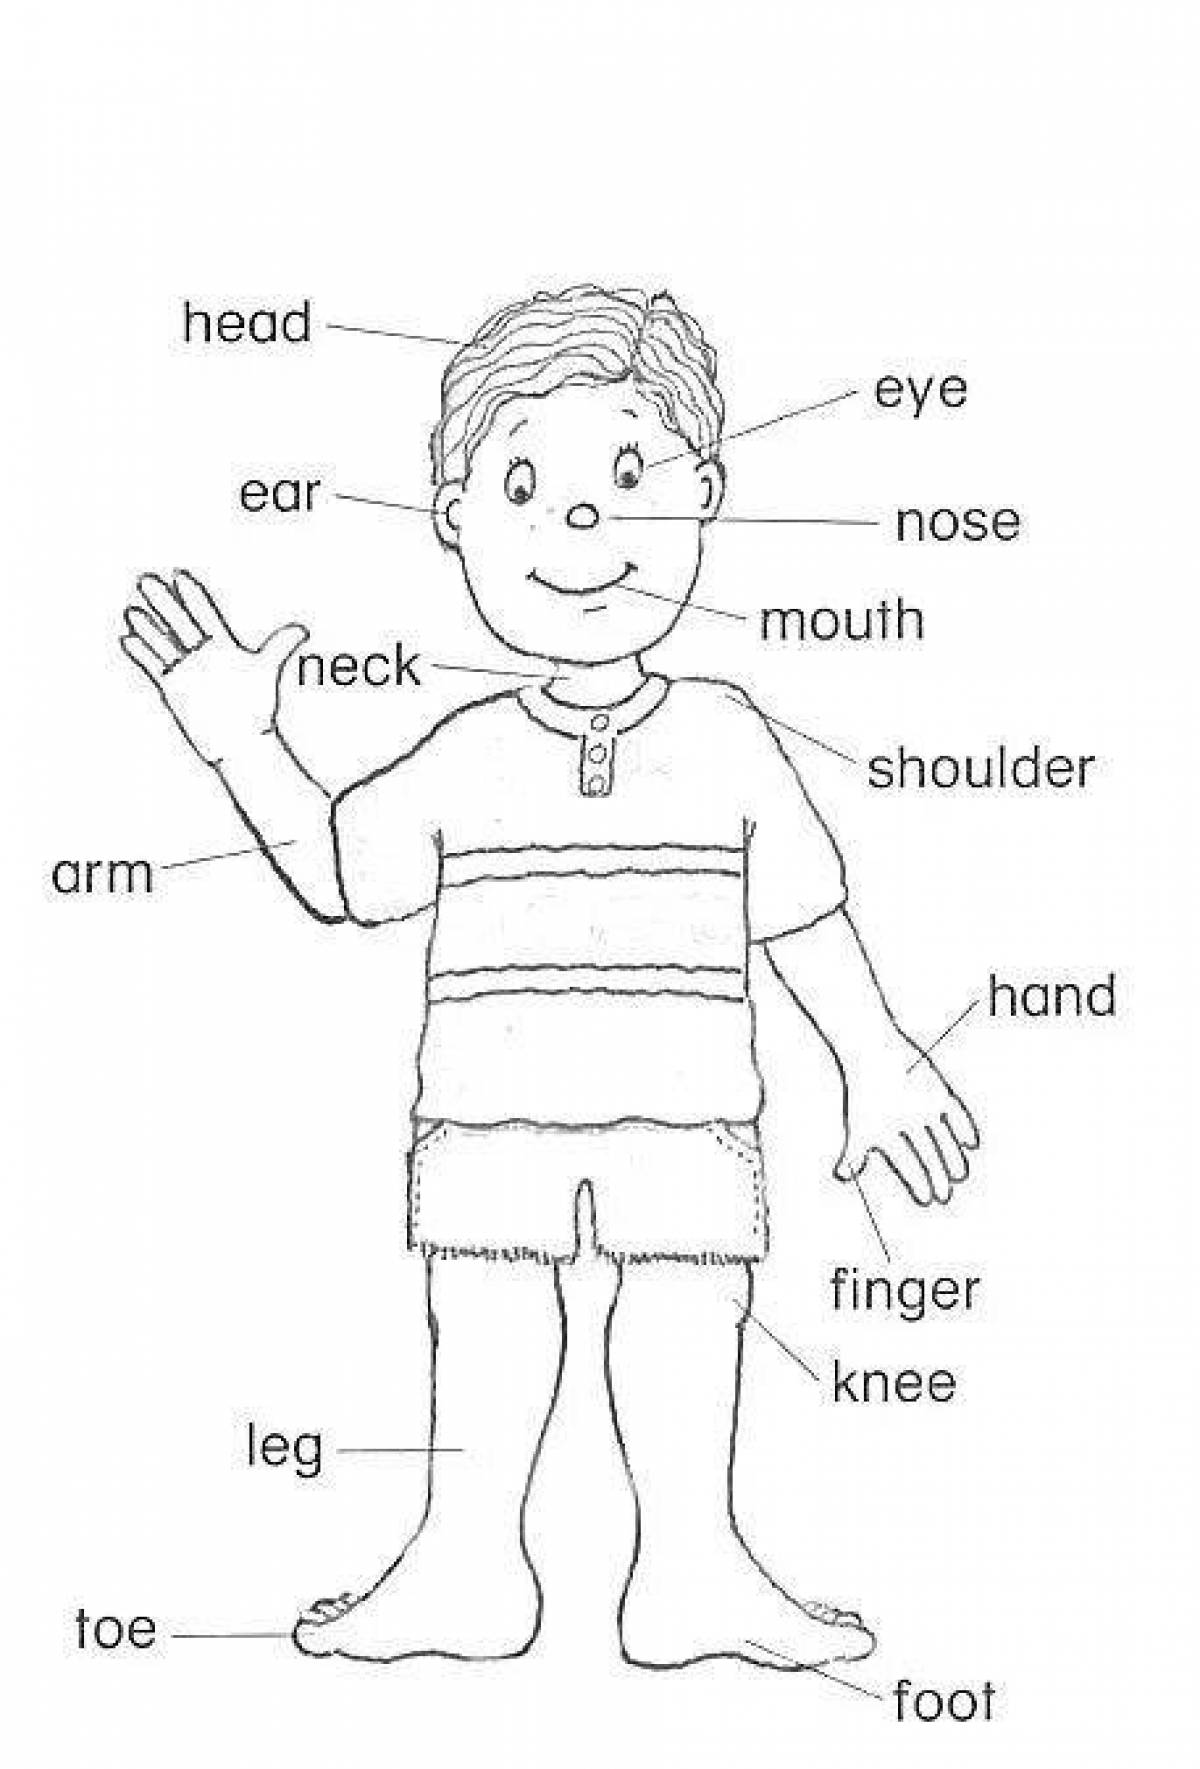 Coloring page of colorful body parts